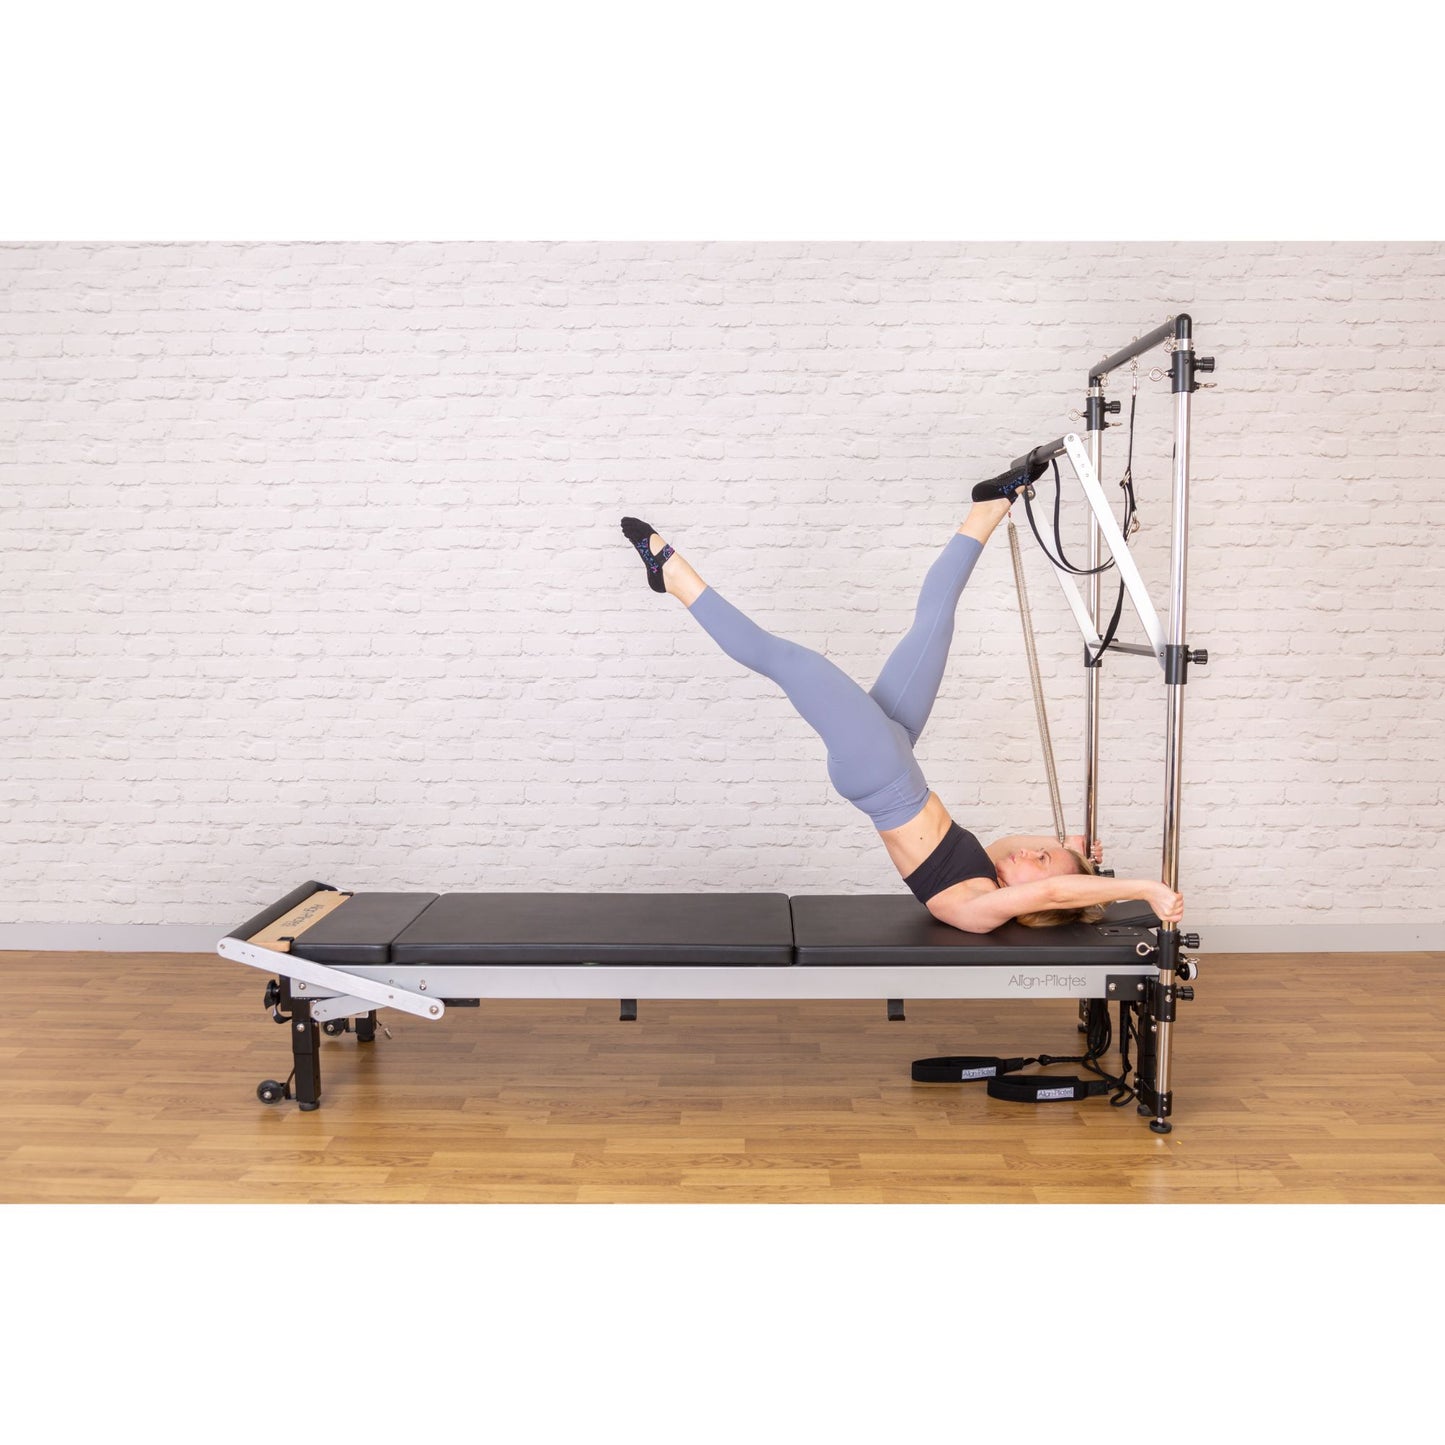 Align-Pilates M8-Pro RC Wood Reformer with Half-Cadillac Tower